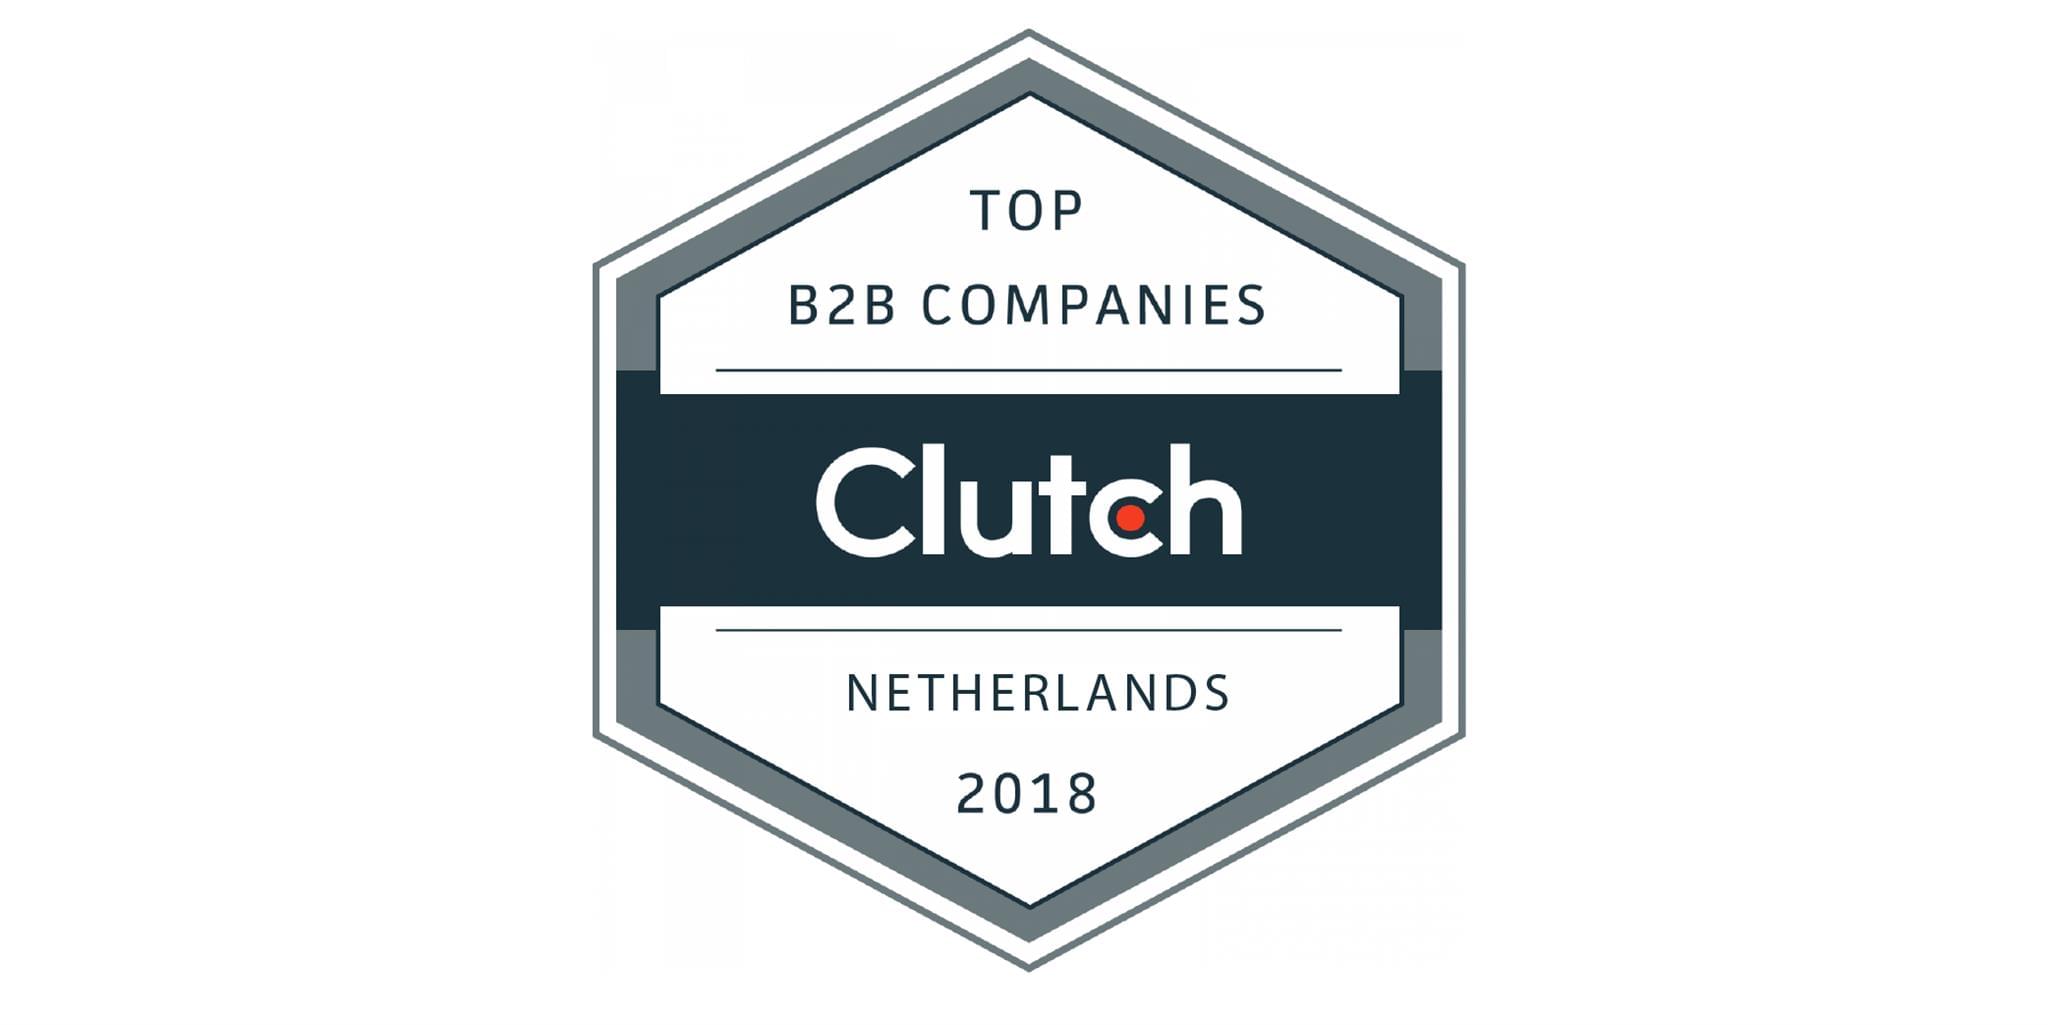 Clutch Recognizes Symphony Solutions as Top B2B Company